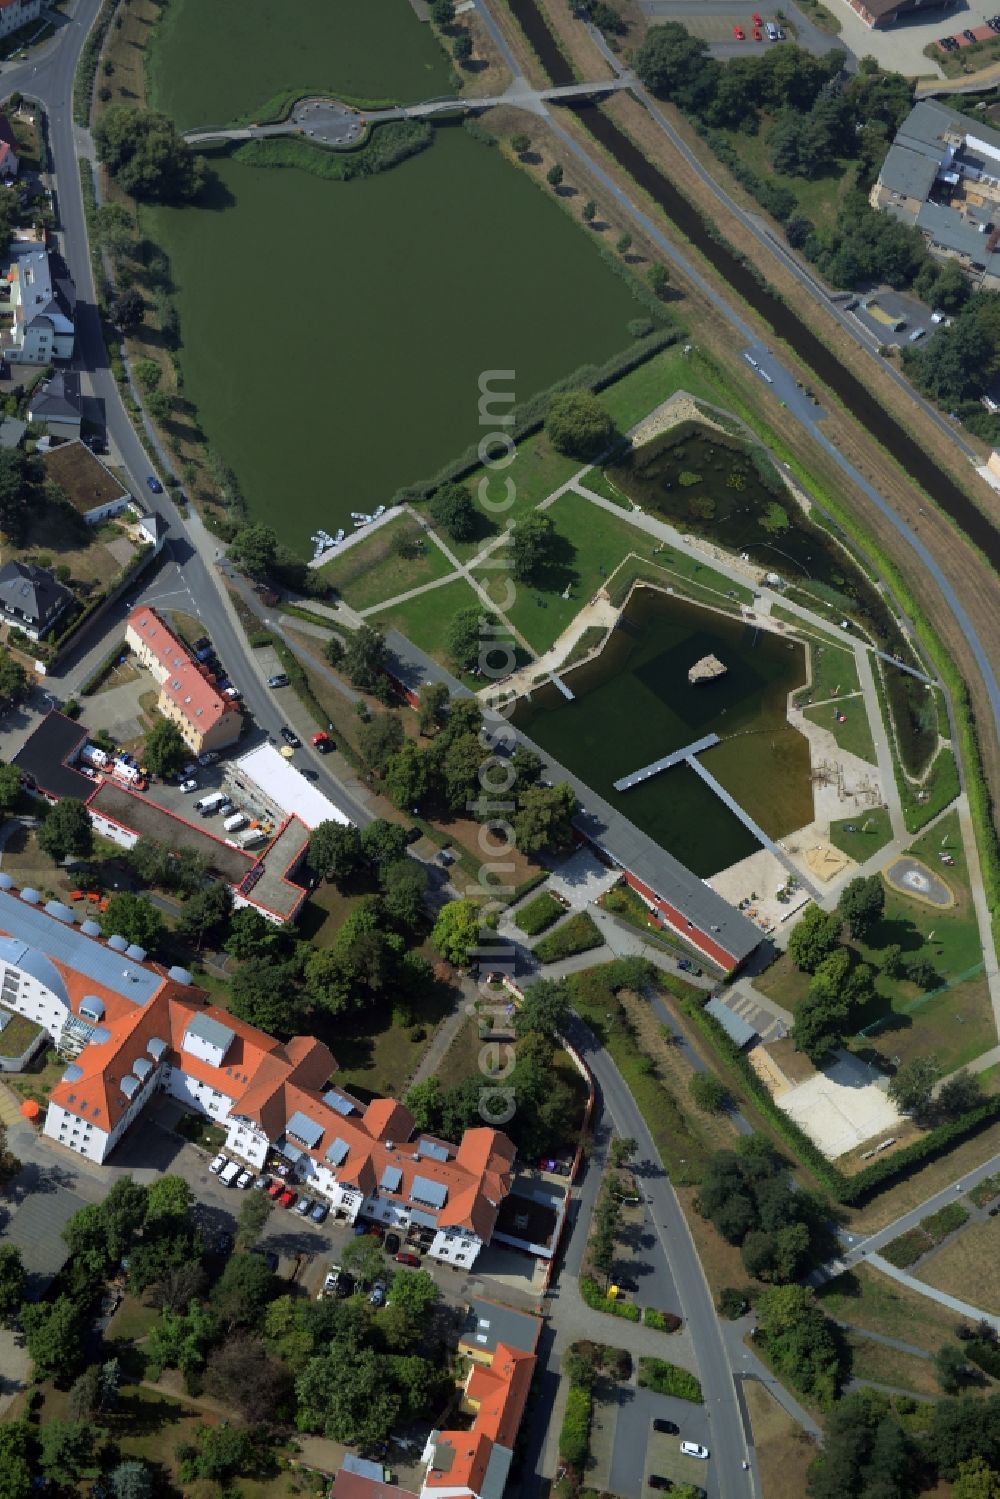 Großenhain from the bird's eye view: Nature outdoor pool in Grossenhain in the state of Saxony. The facilities include several buildings as well as a lake compound and bridges. The pool borders the canal of Roederneugraben